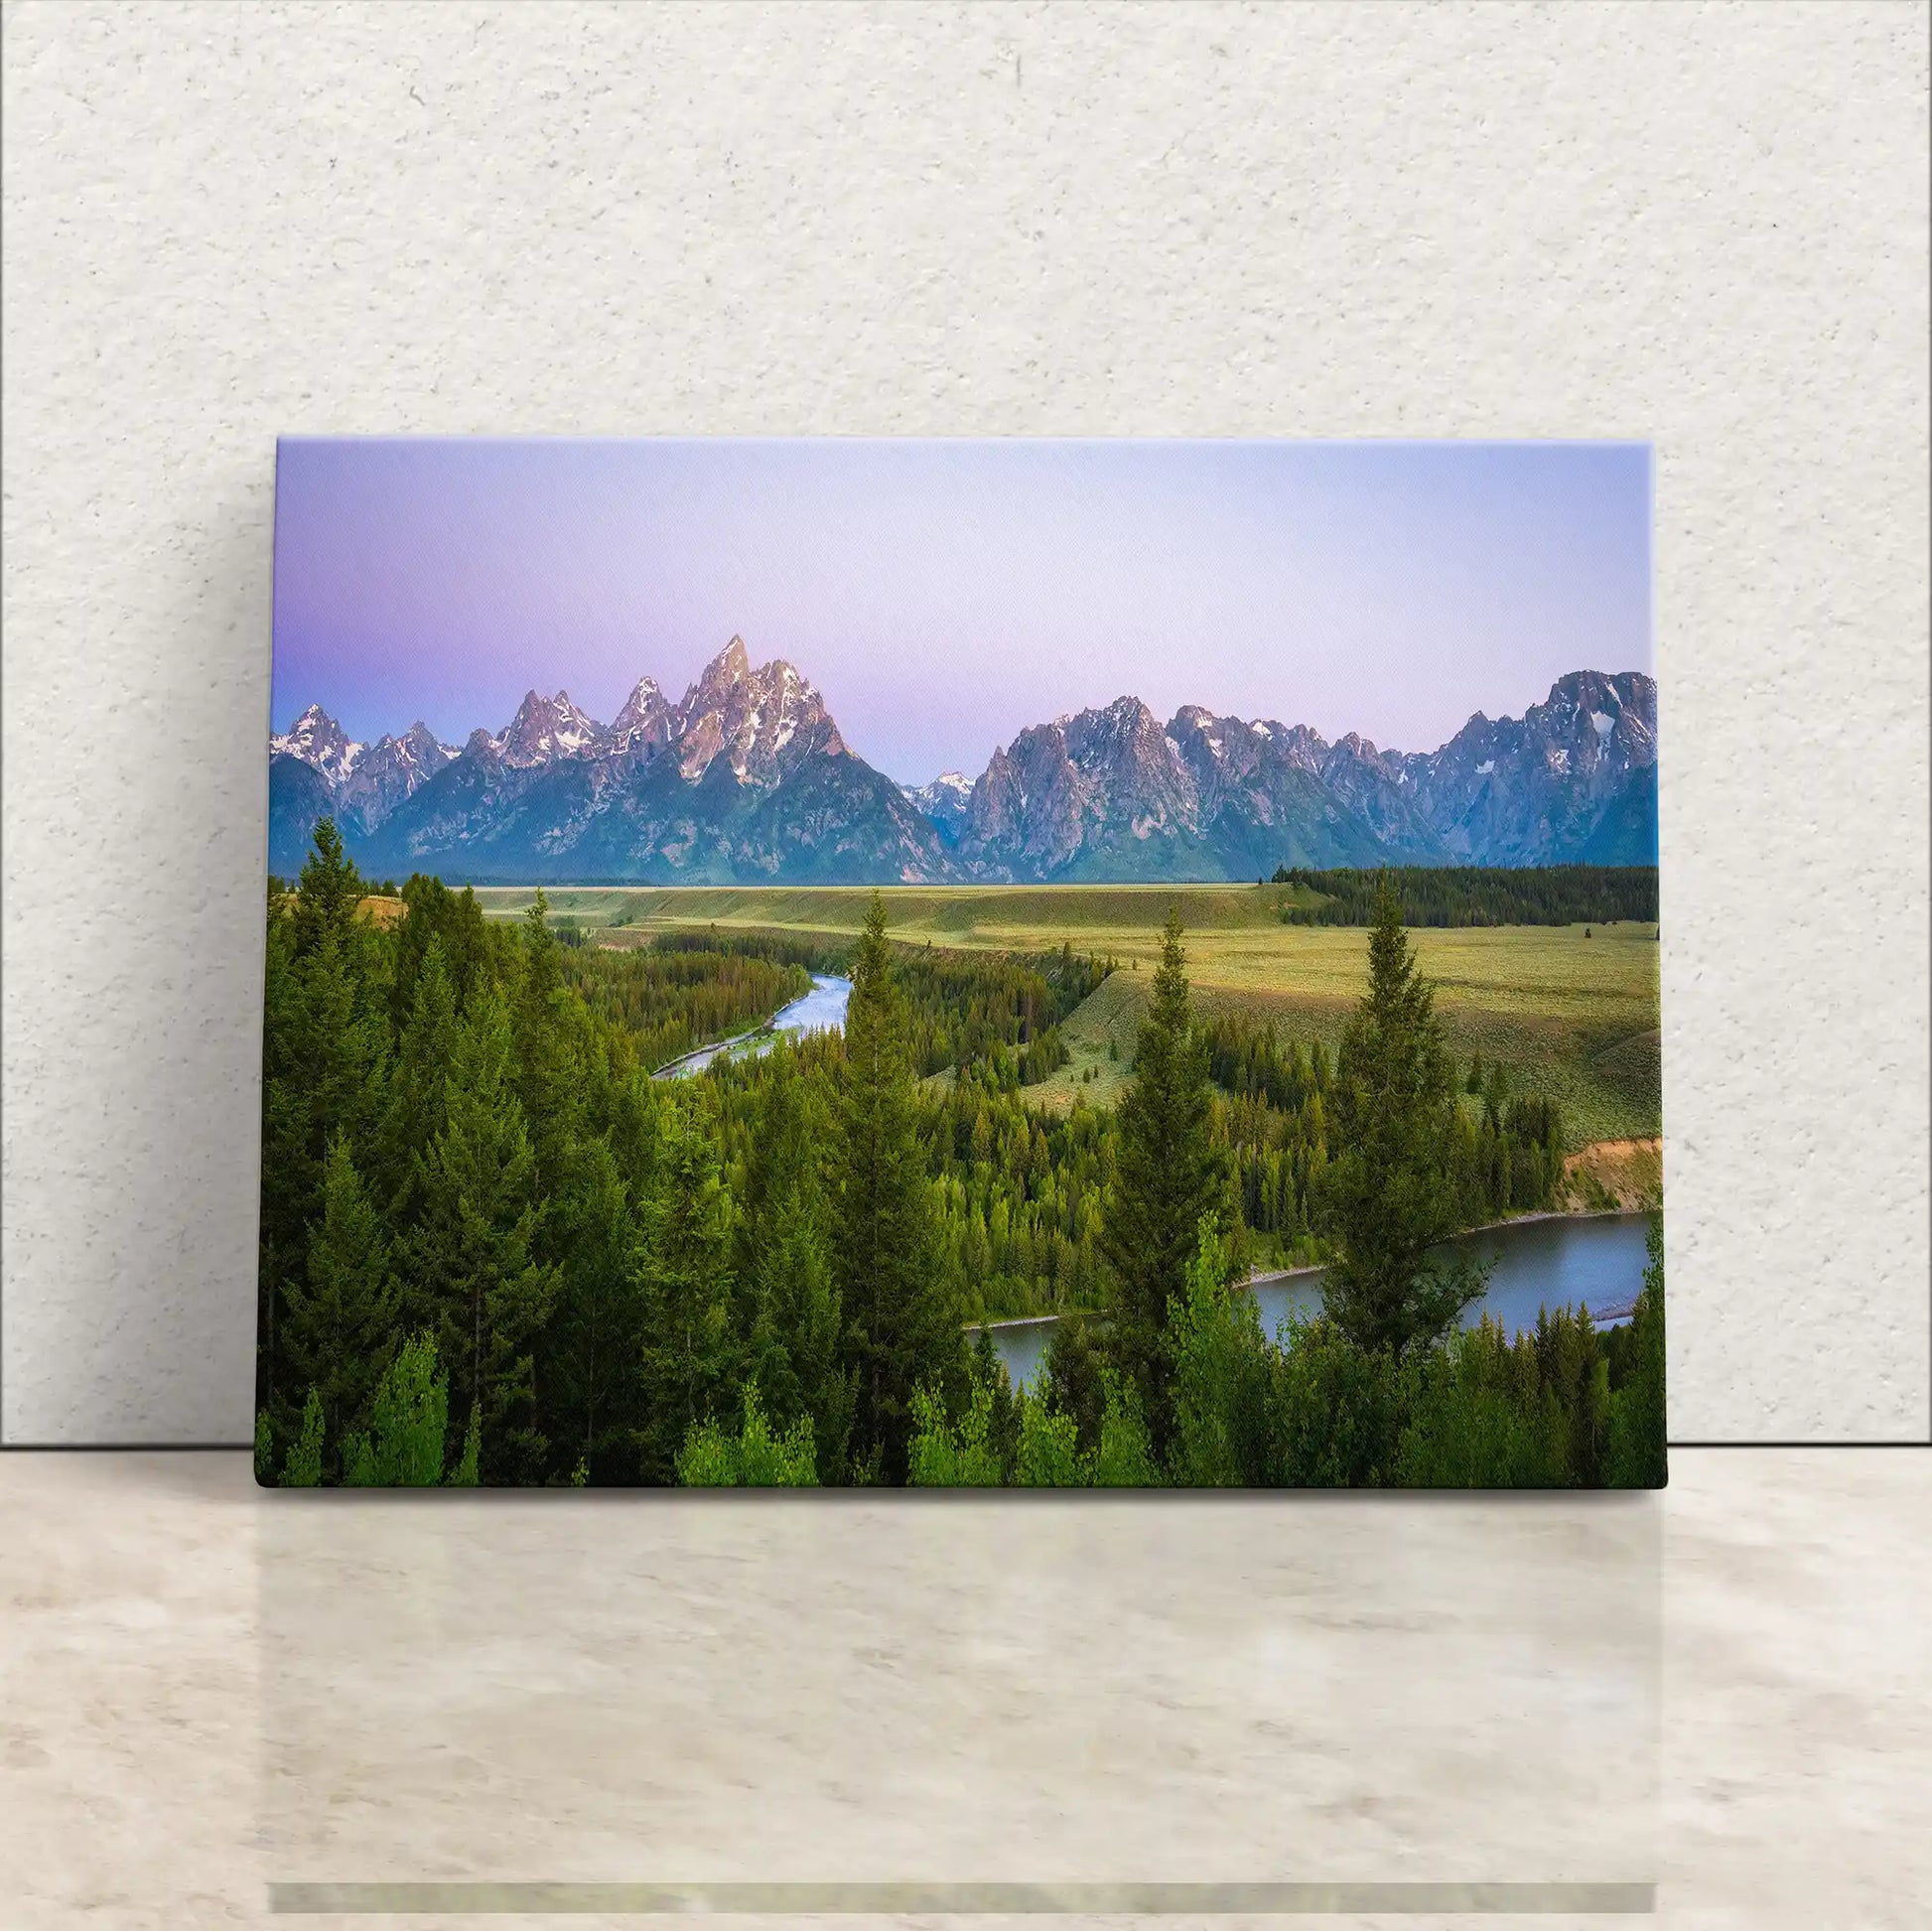 Gallery-wrapped canvas print of Grand Teton Mountains at sunrise with a purple sky and lush greenery in the foreground.